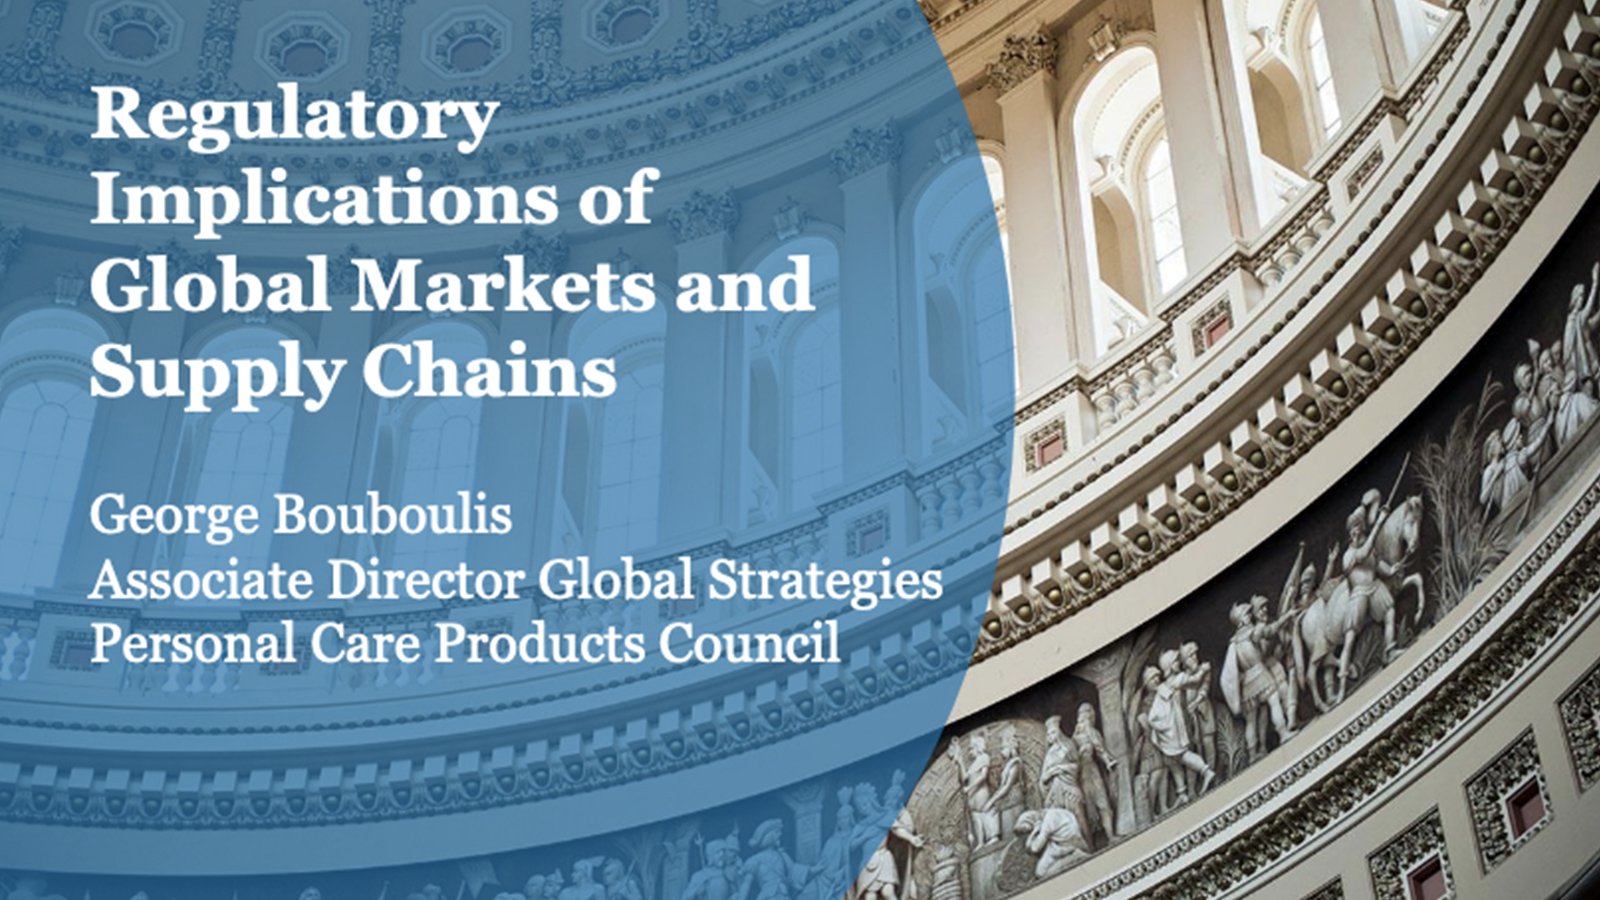 Regulatory Implications of Global Markets and Supply Chains PCPC